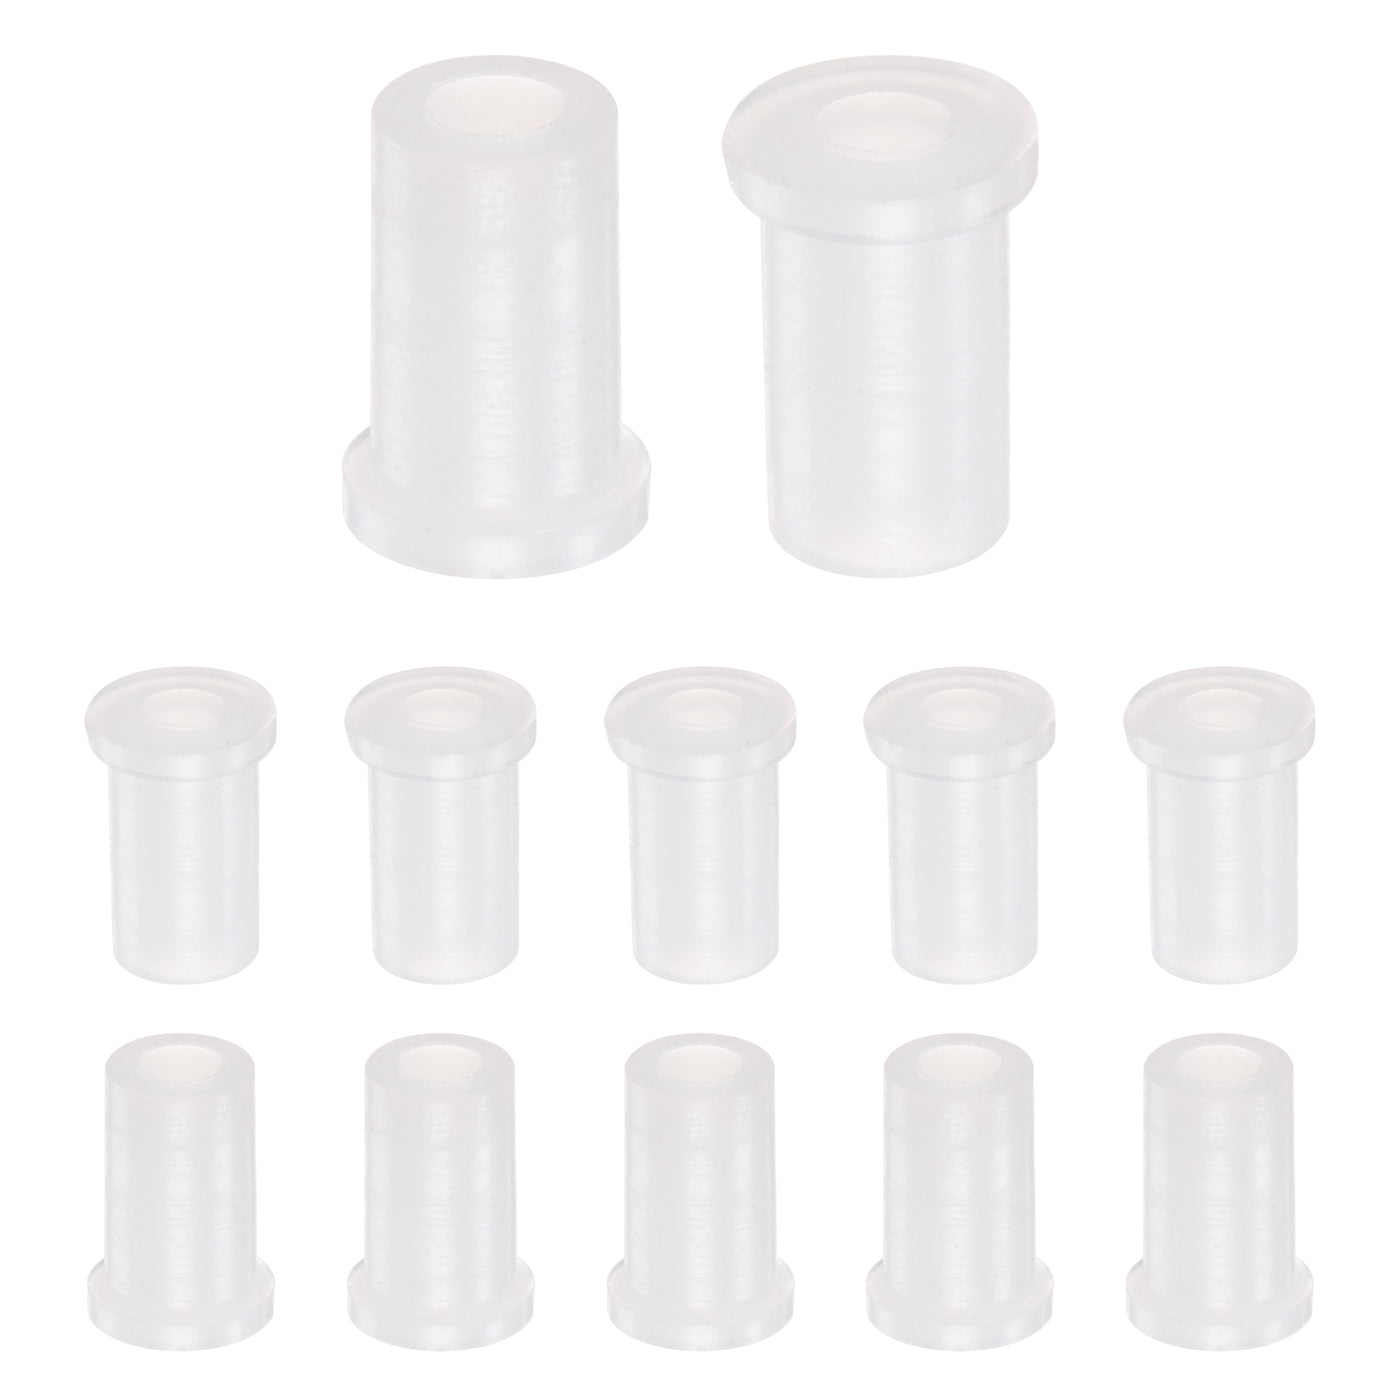 uxcell Uxcell 12pcs Flanged Sleeve Bearings 4mm ID 7.45mm OD 13mm Length Nylon Bushings, White